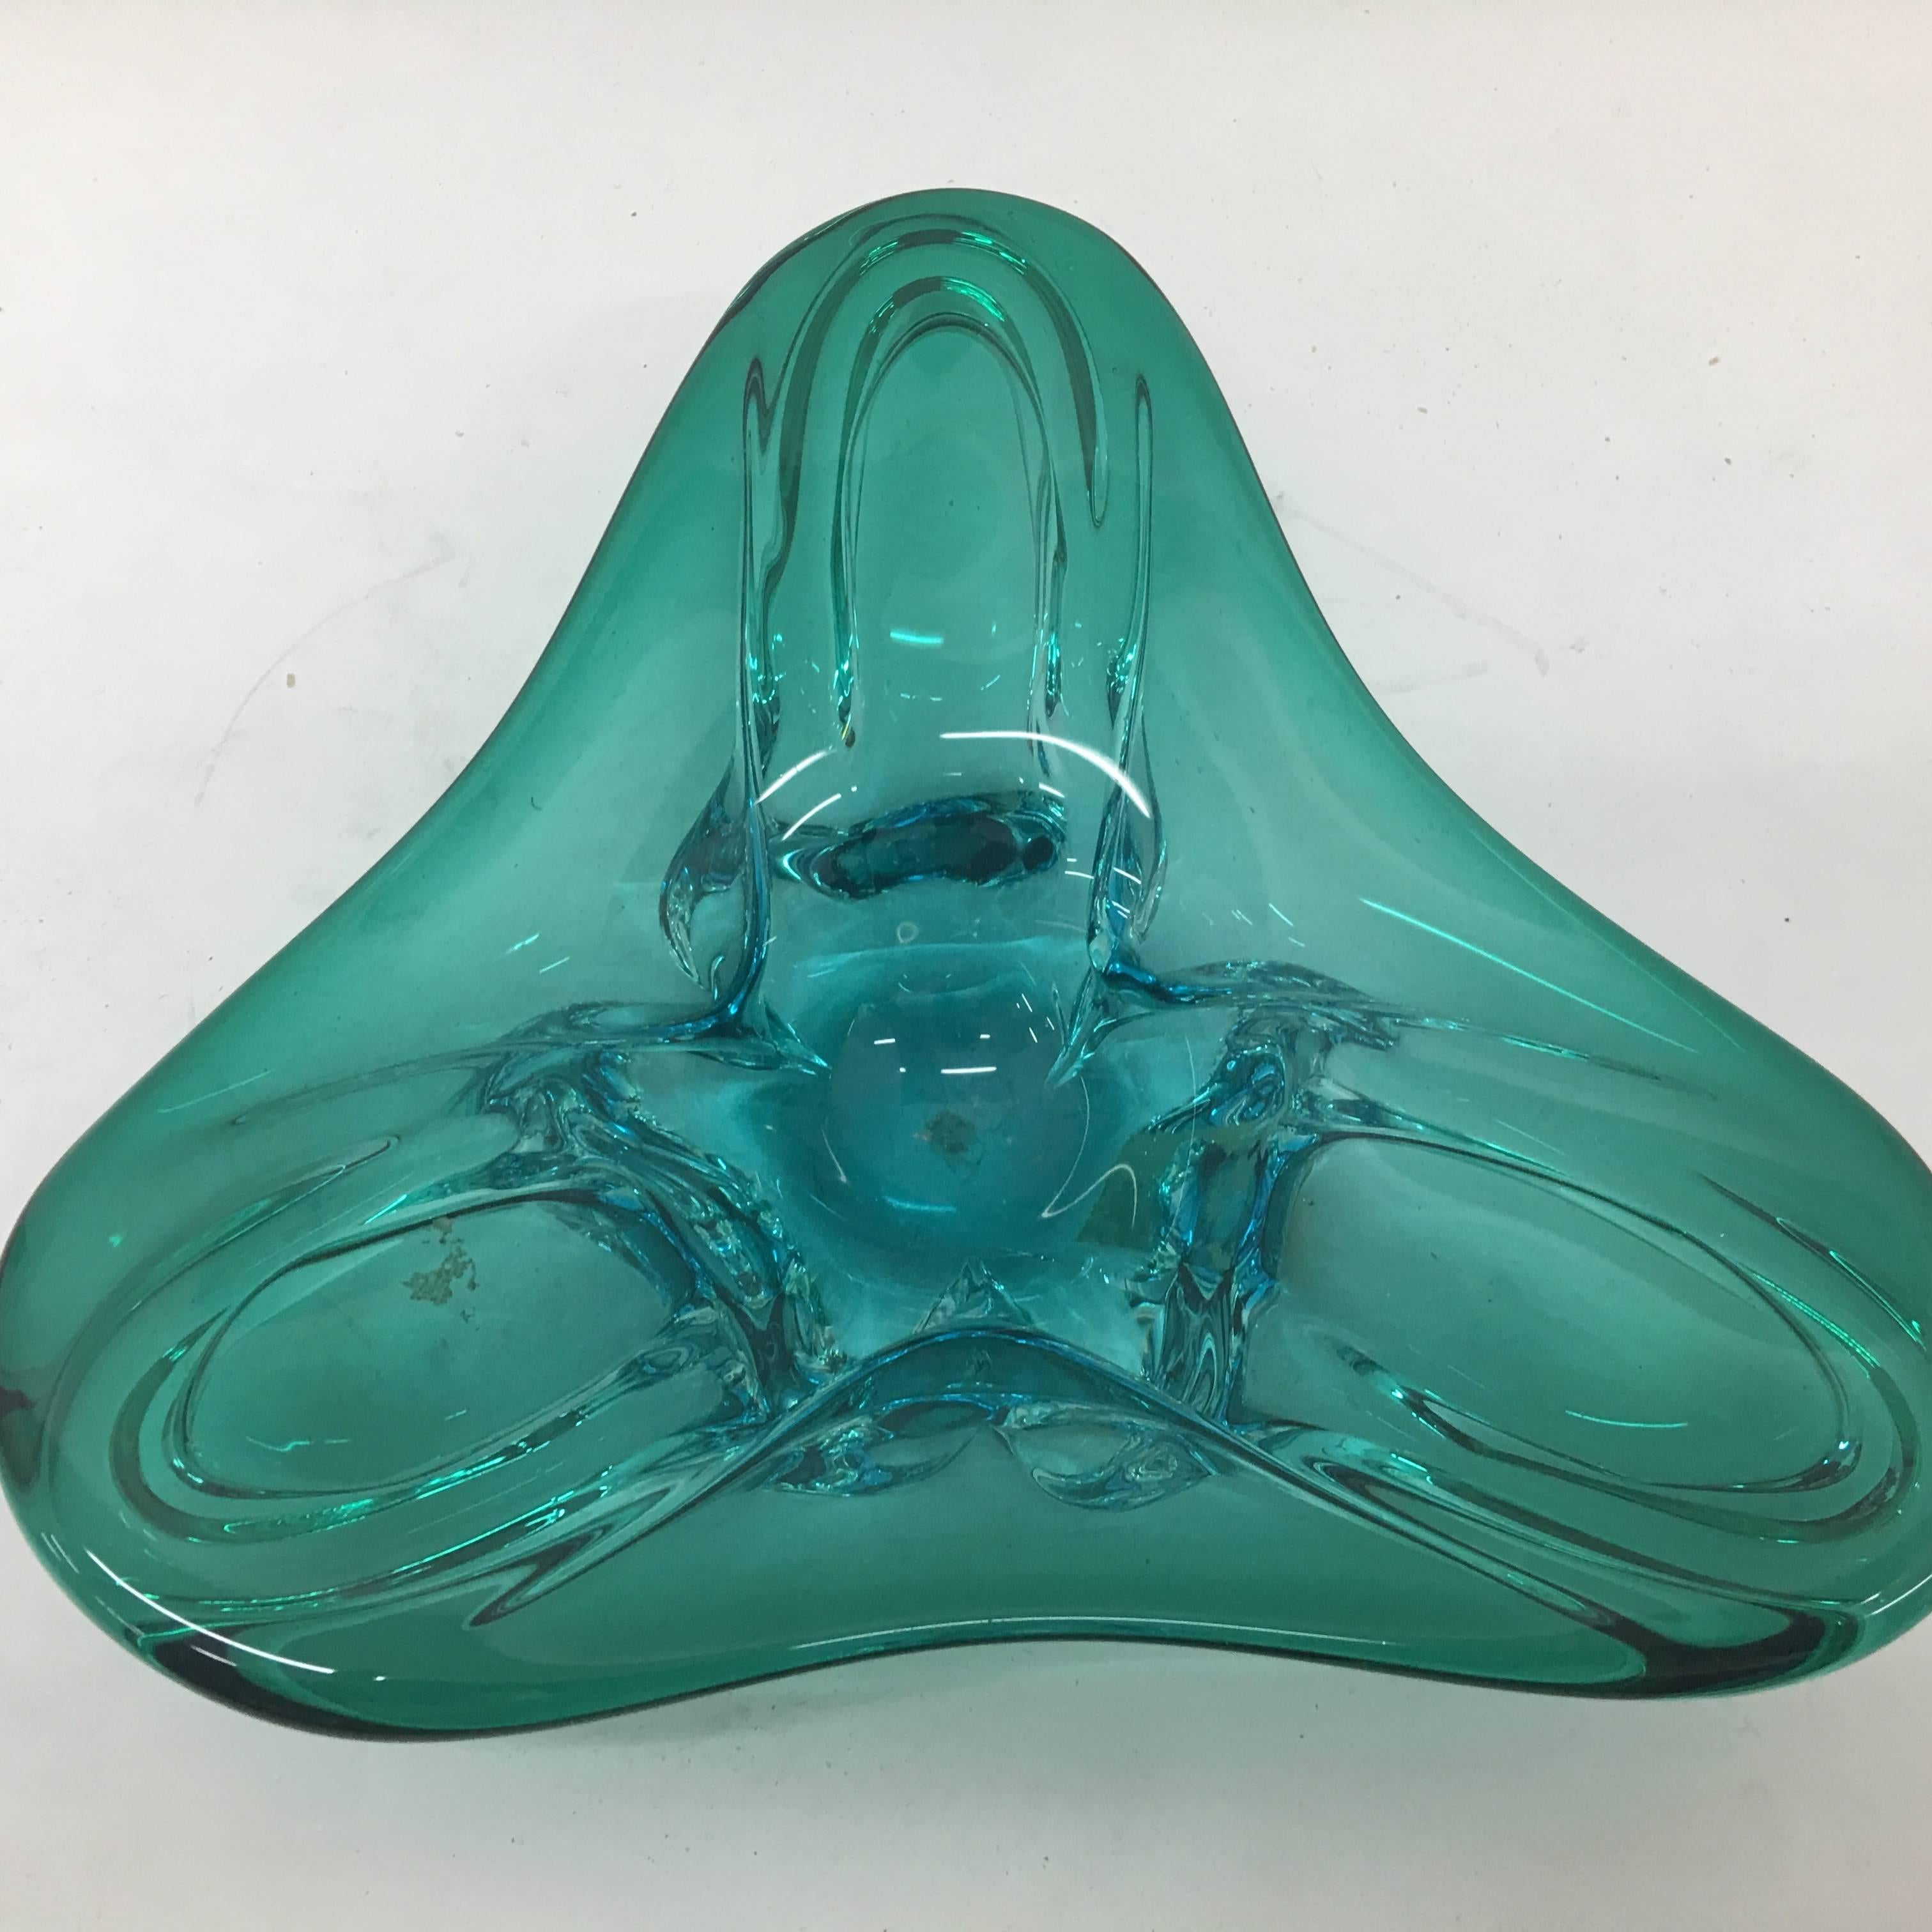 This is a large ashtray made in Italy, very heavy Verde Nilo glass by Poli Murano, perfect conditions.